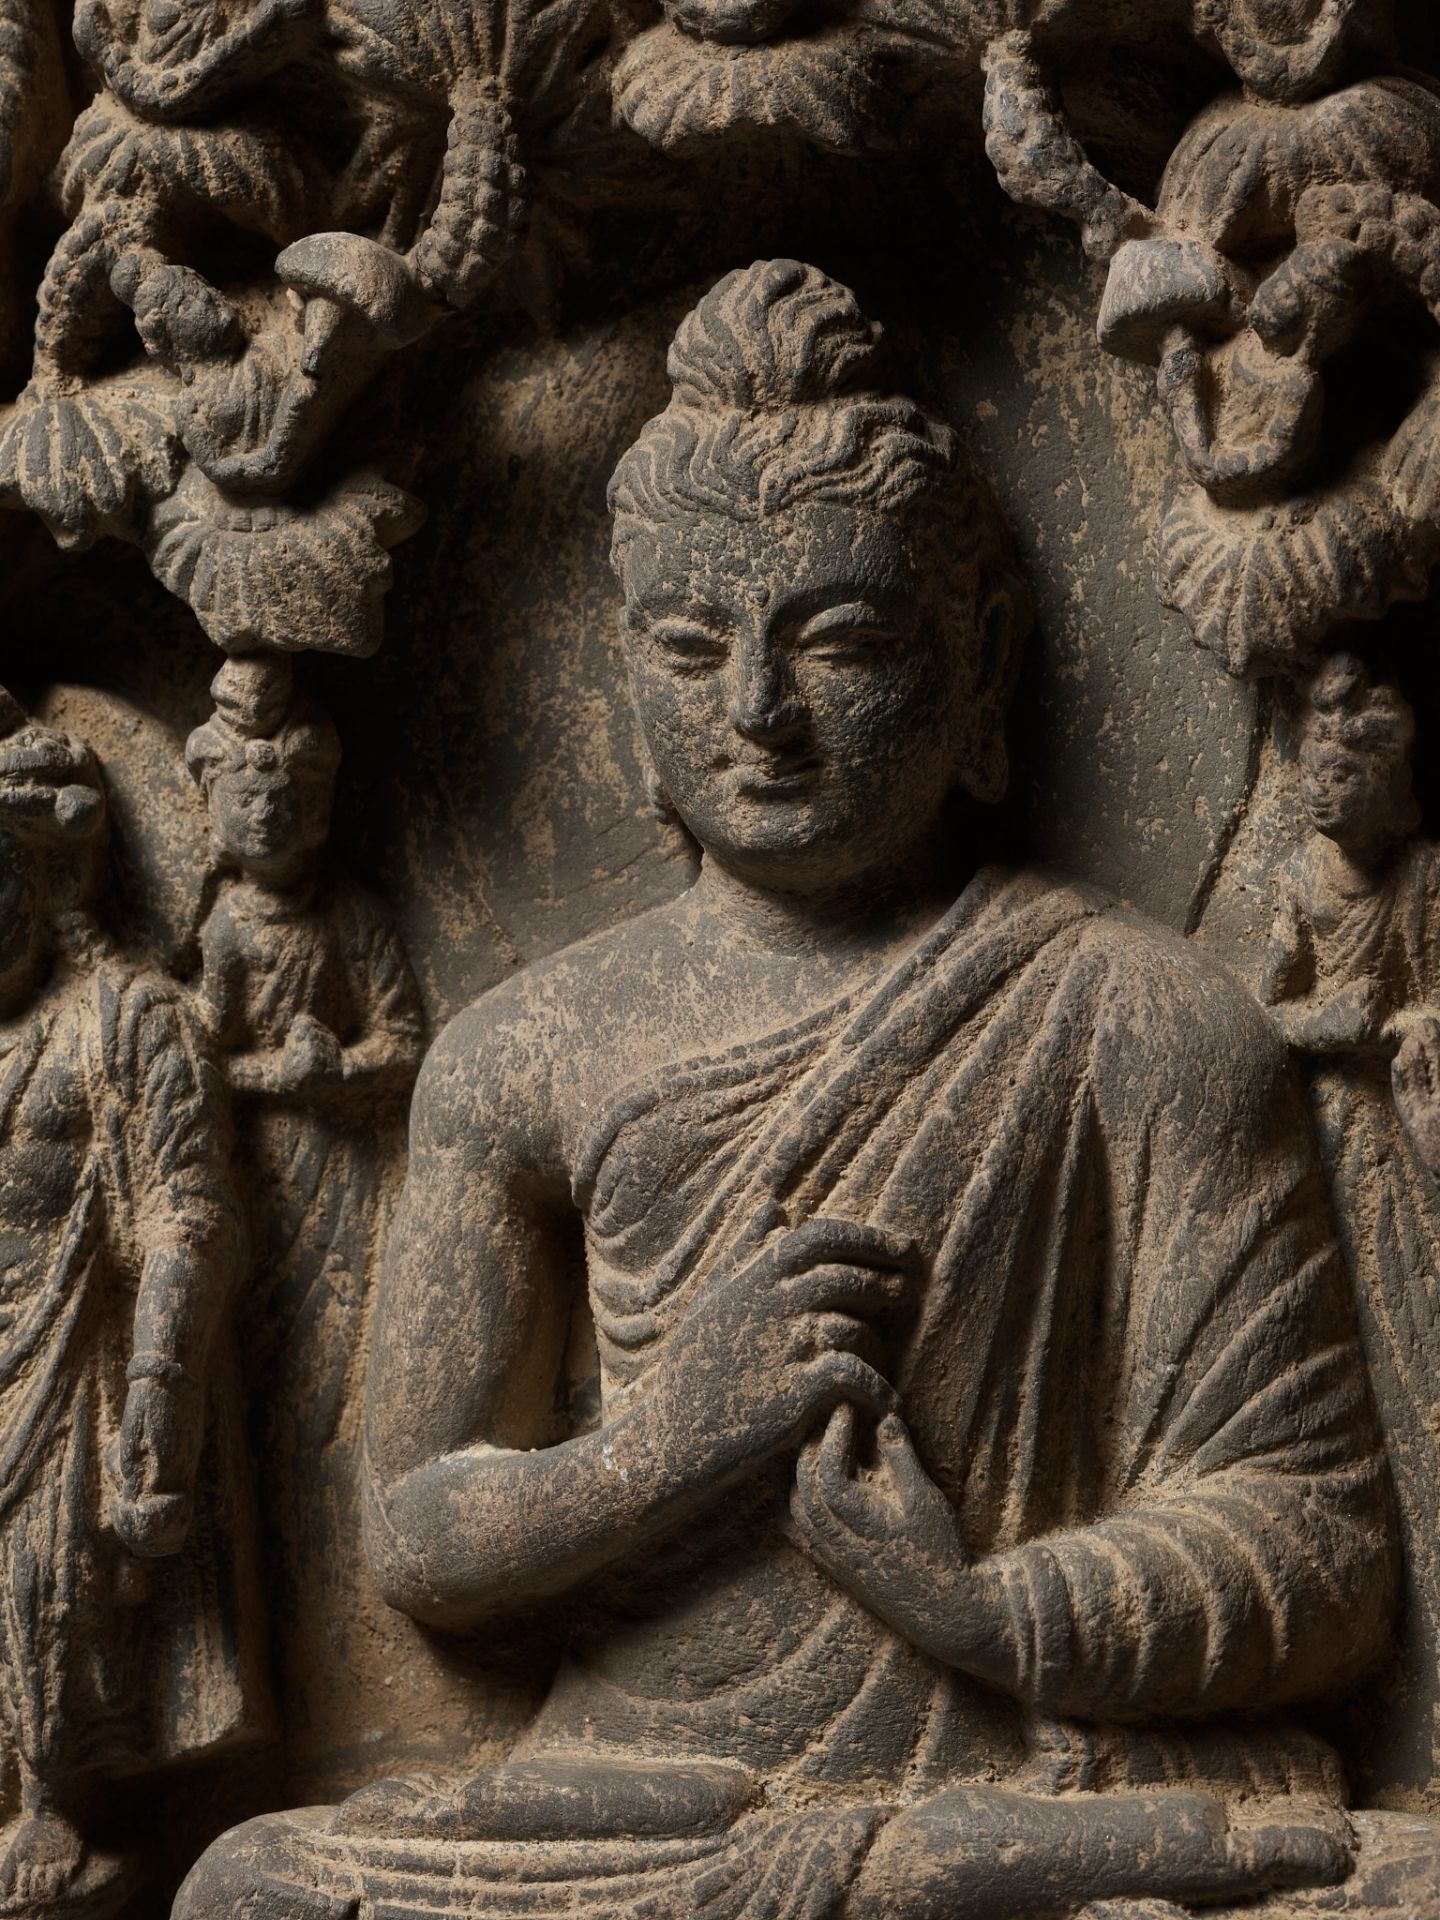 A SCHIST STELE DEPICTING BUDDHA, ANCIENT REGION OF GANDHARA, 3RD-4TH CENTURY - Image 3 of 11